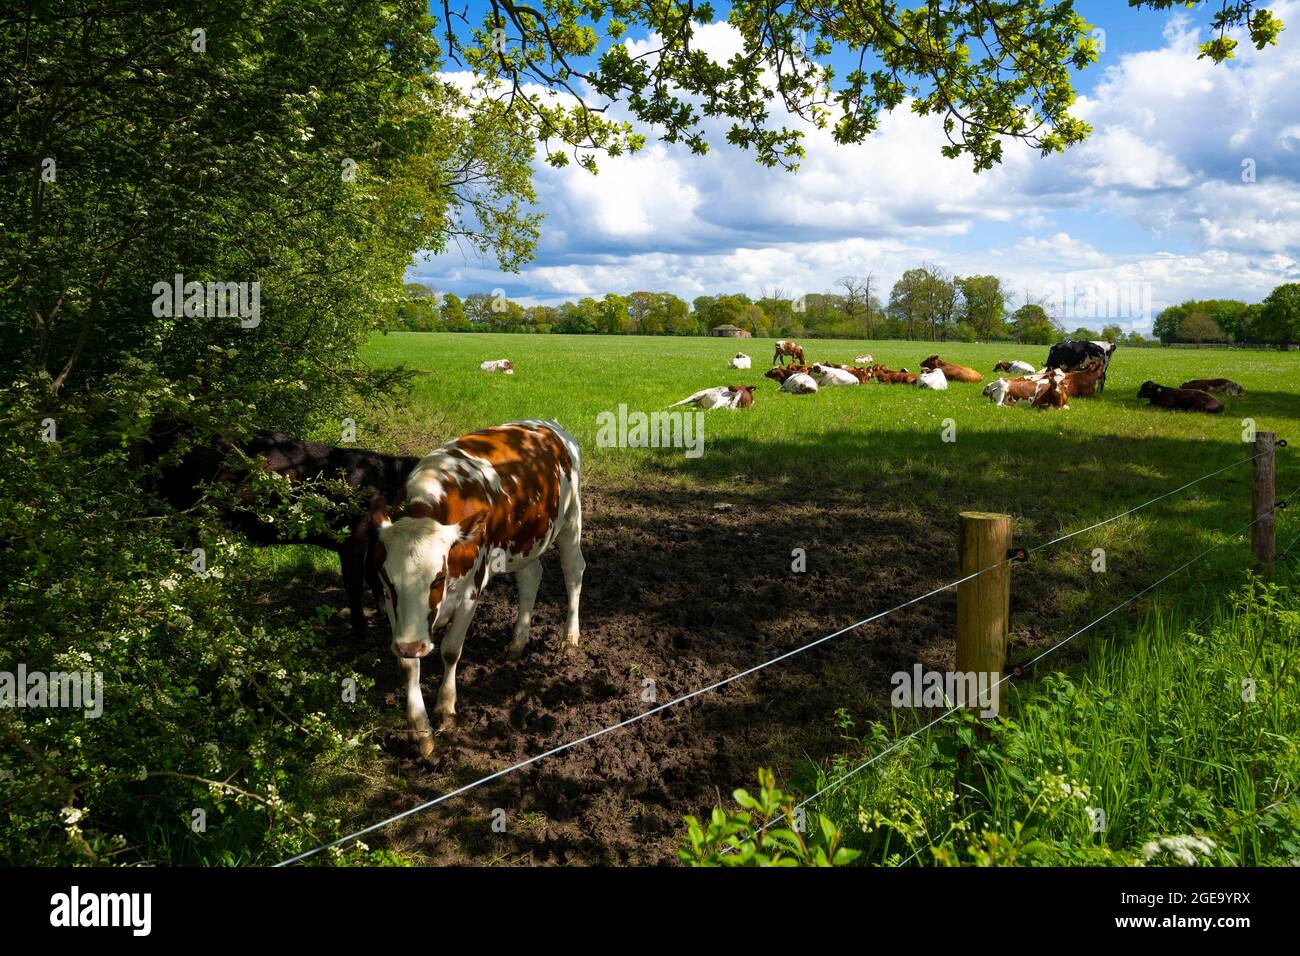 Herd of red and white friesian holstein cattle grazing in a field in summer. Stock Photo